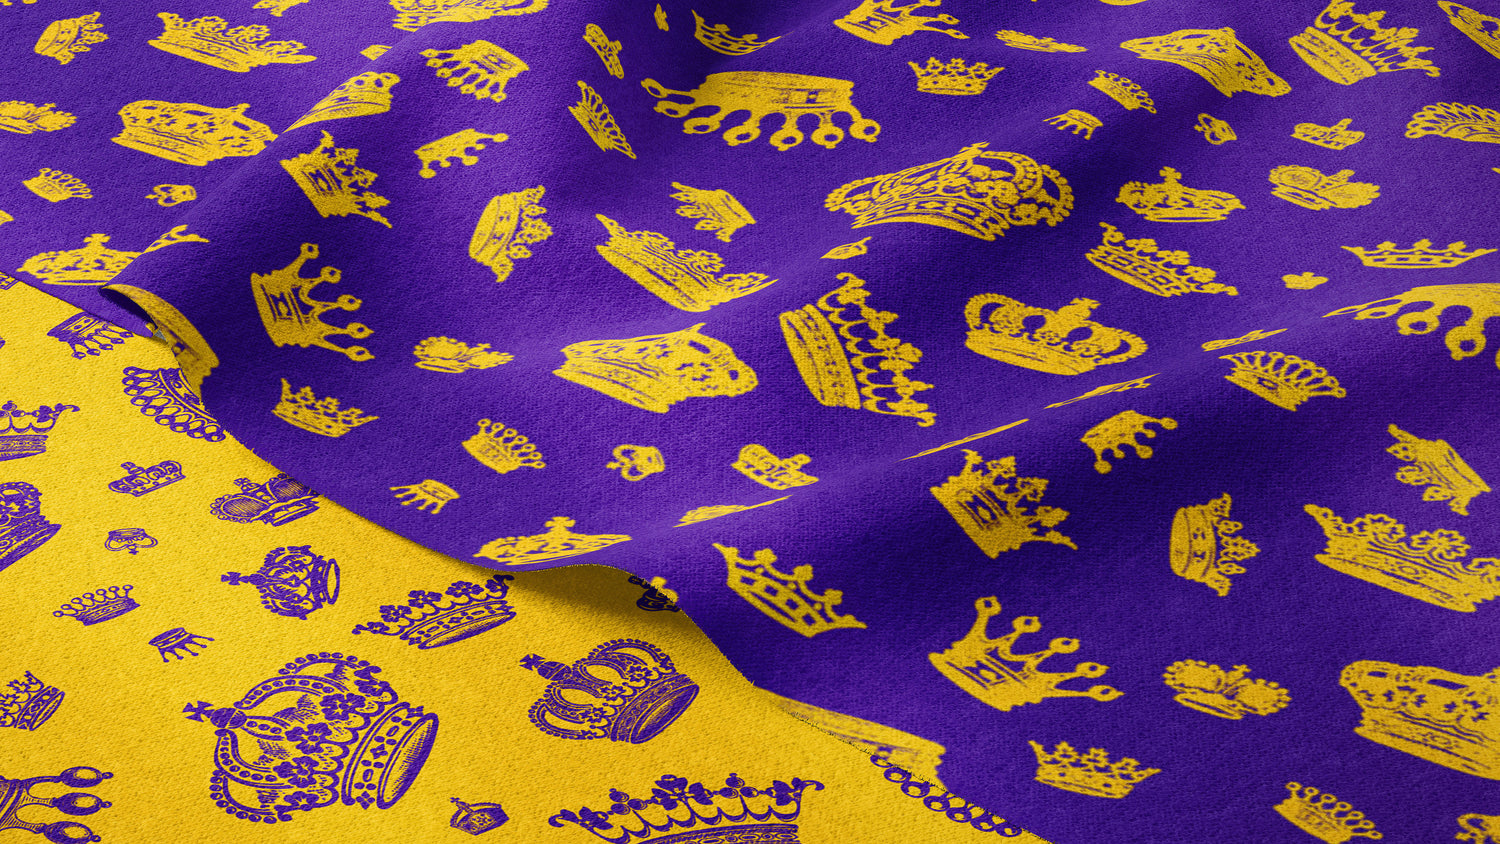 Royal Crowns in Purple and Gold by Studio Ten Design